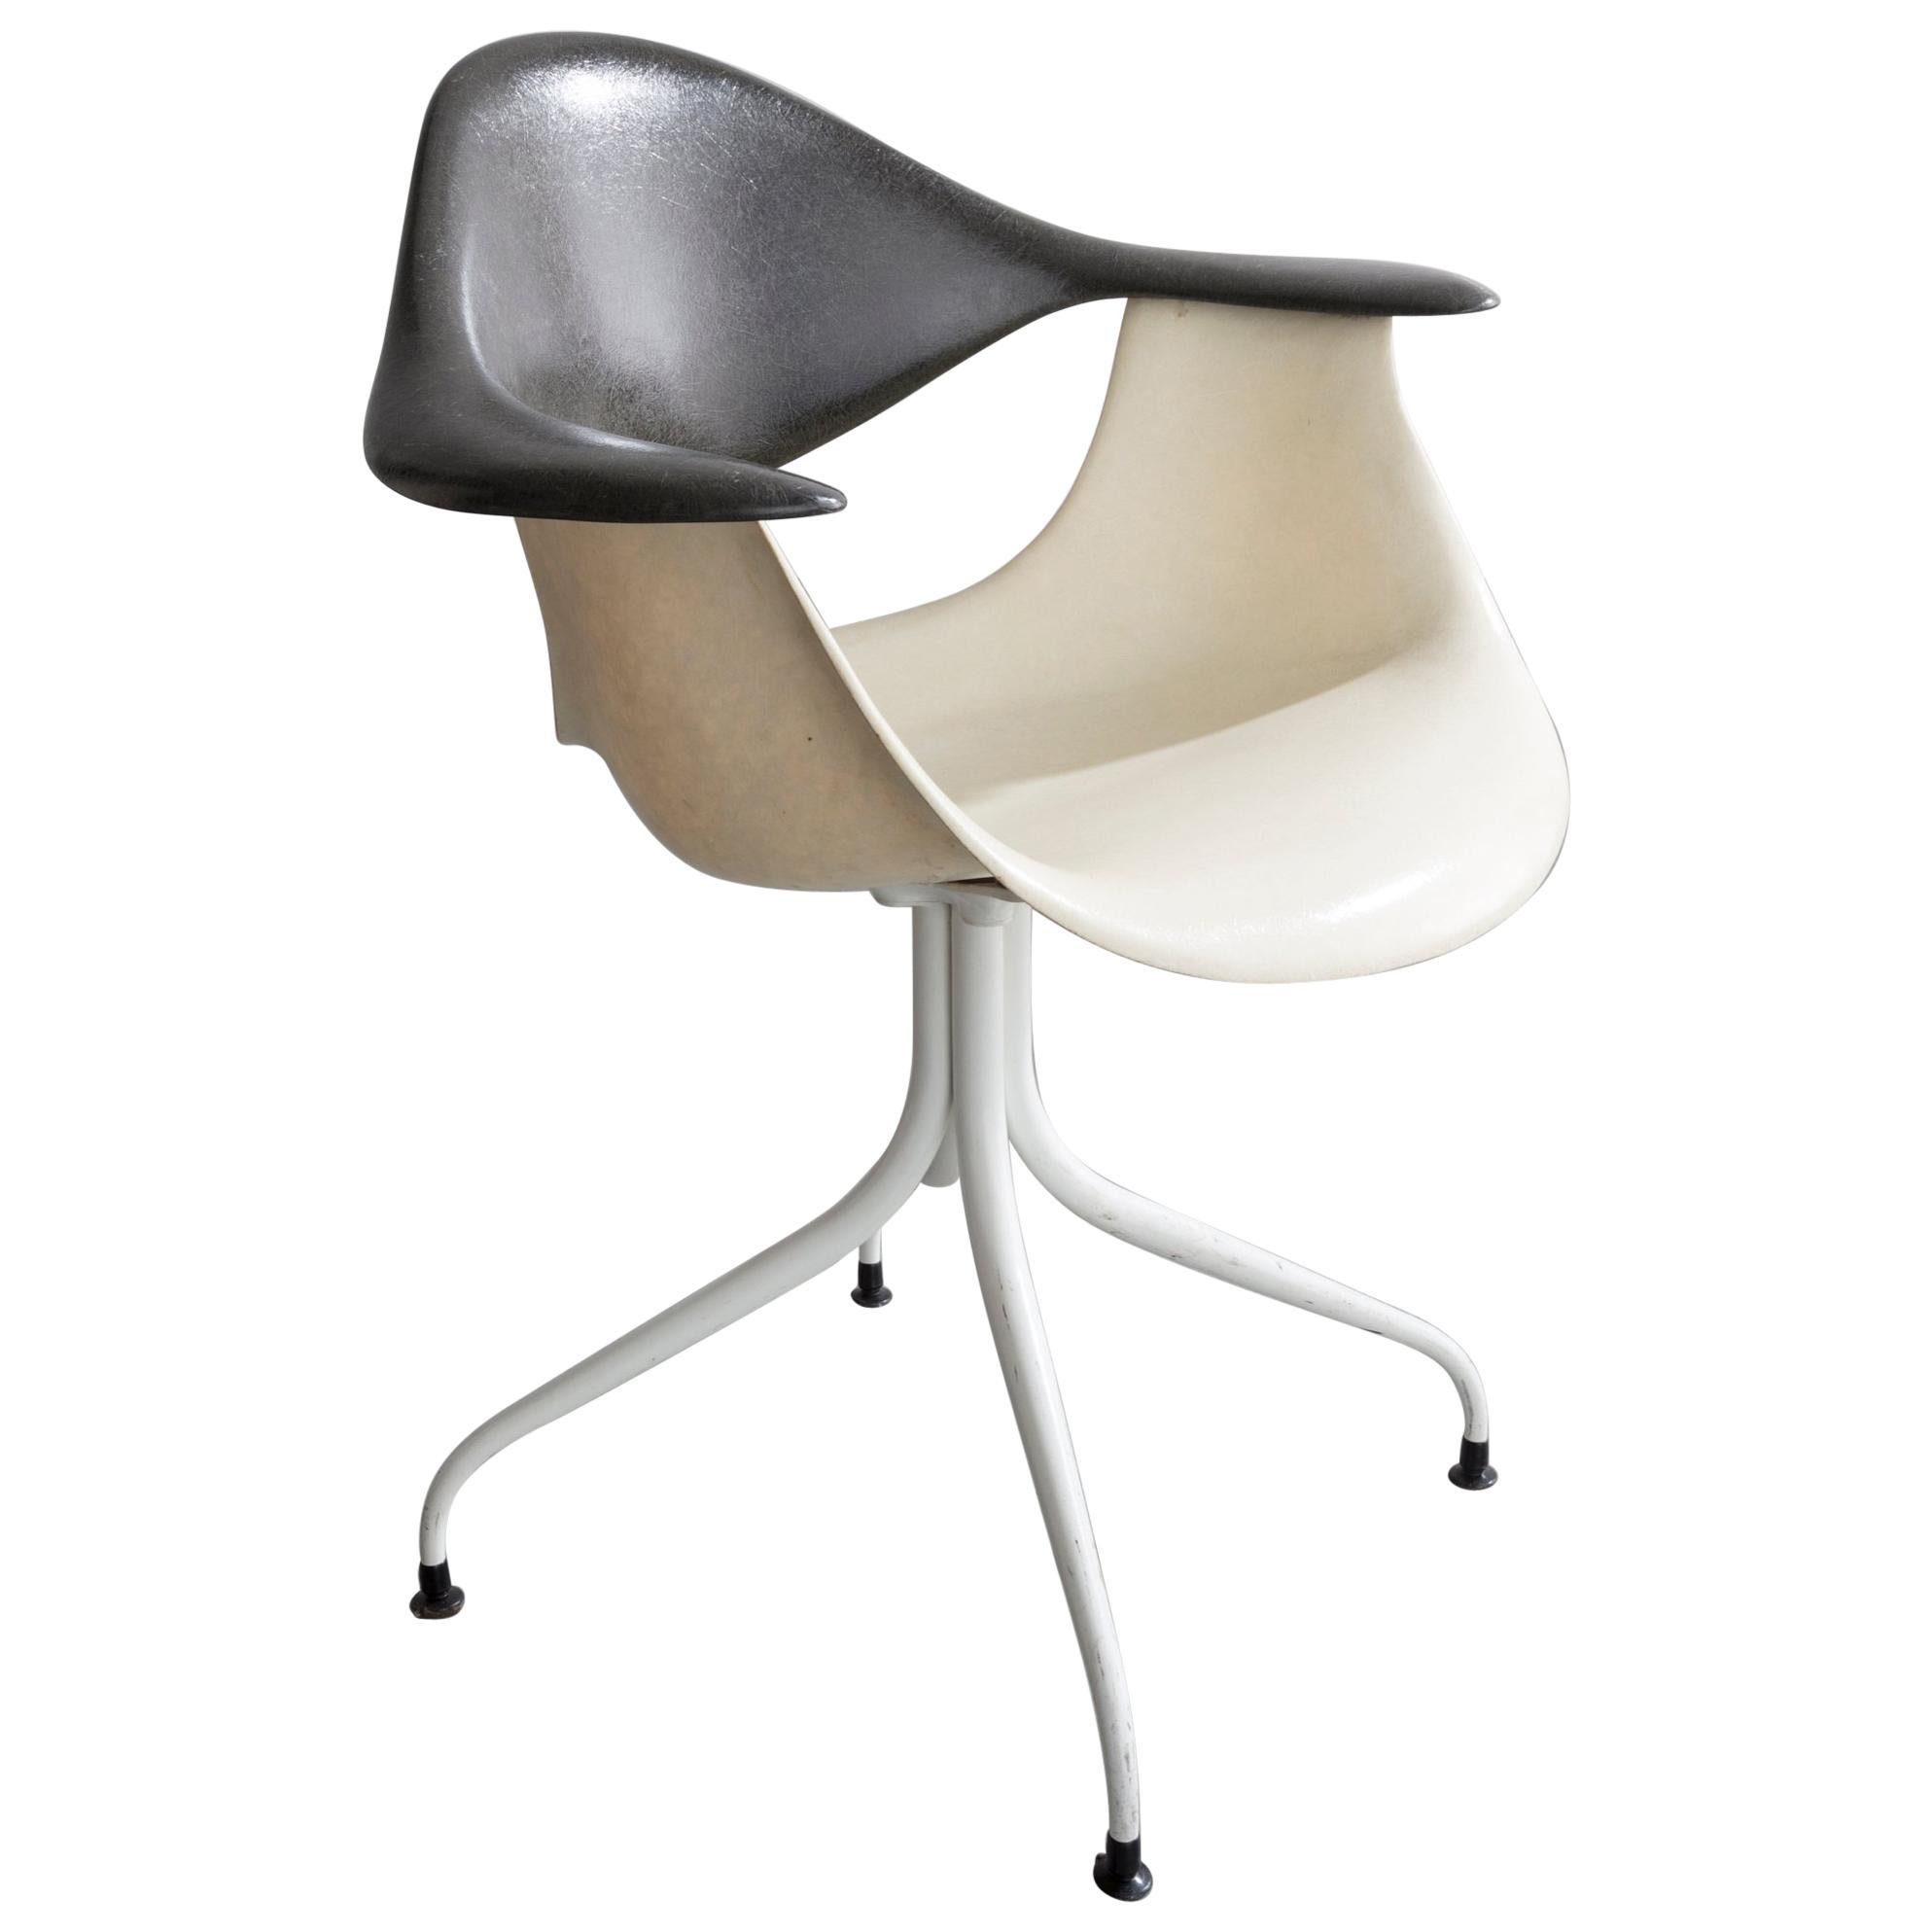 Swaged Leg Chair in Gray and White by Georg Nelson & Associates, 1954 For Sale